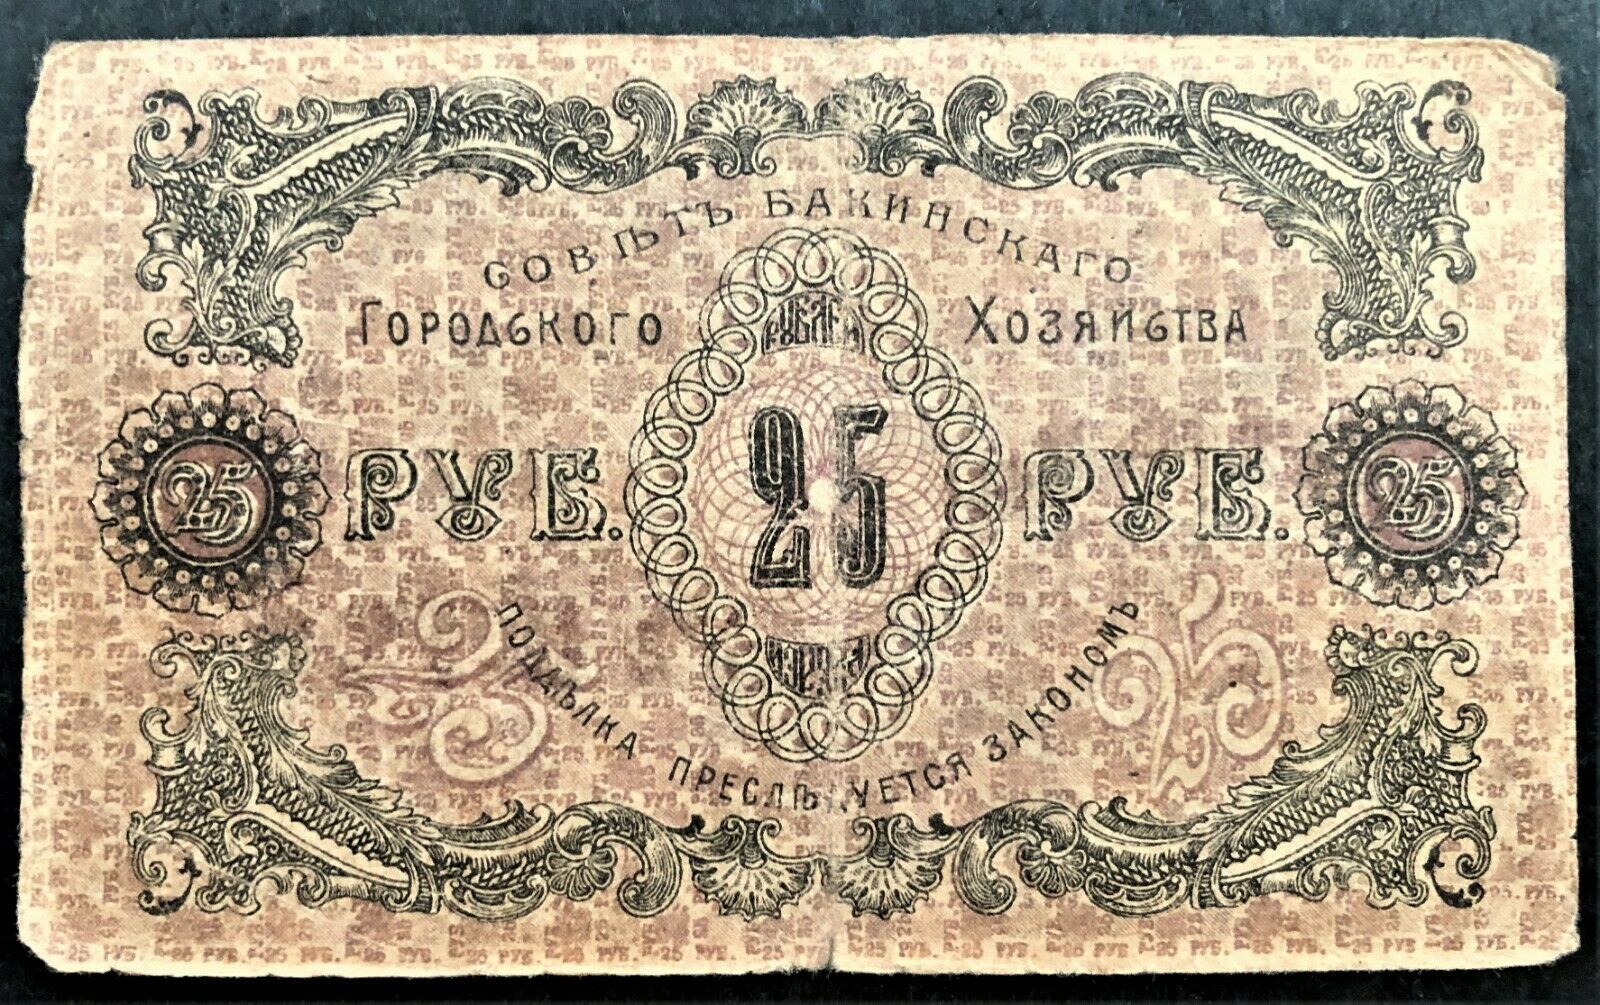 RUSSIA SOVIET BAKU PICK# S732 with GREAT SERIAL # 0010 on 25 RUBLES of 1918 CIRC